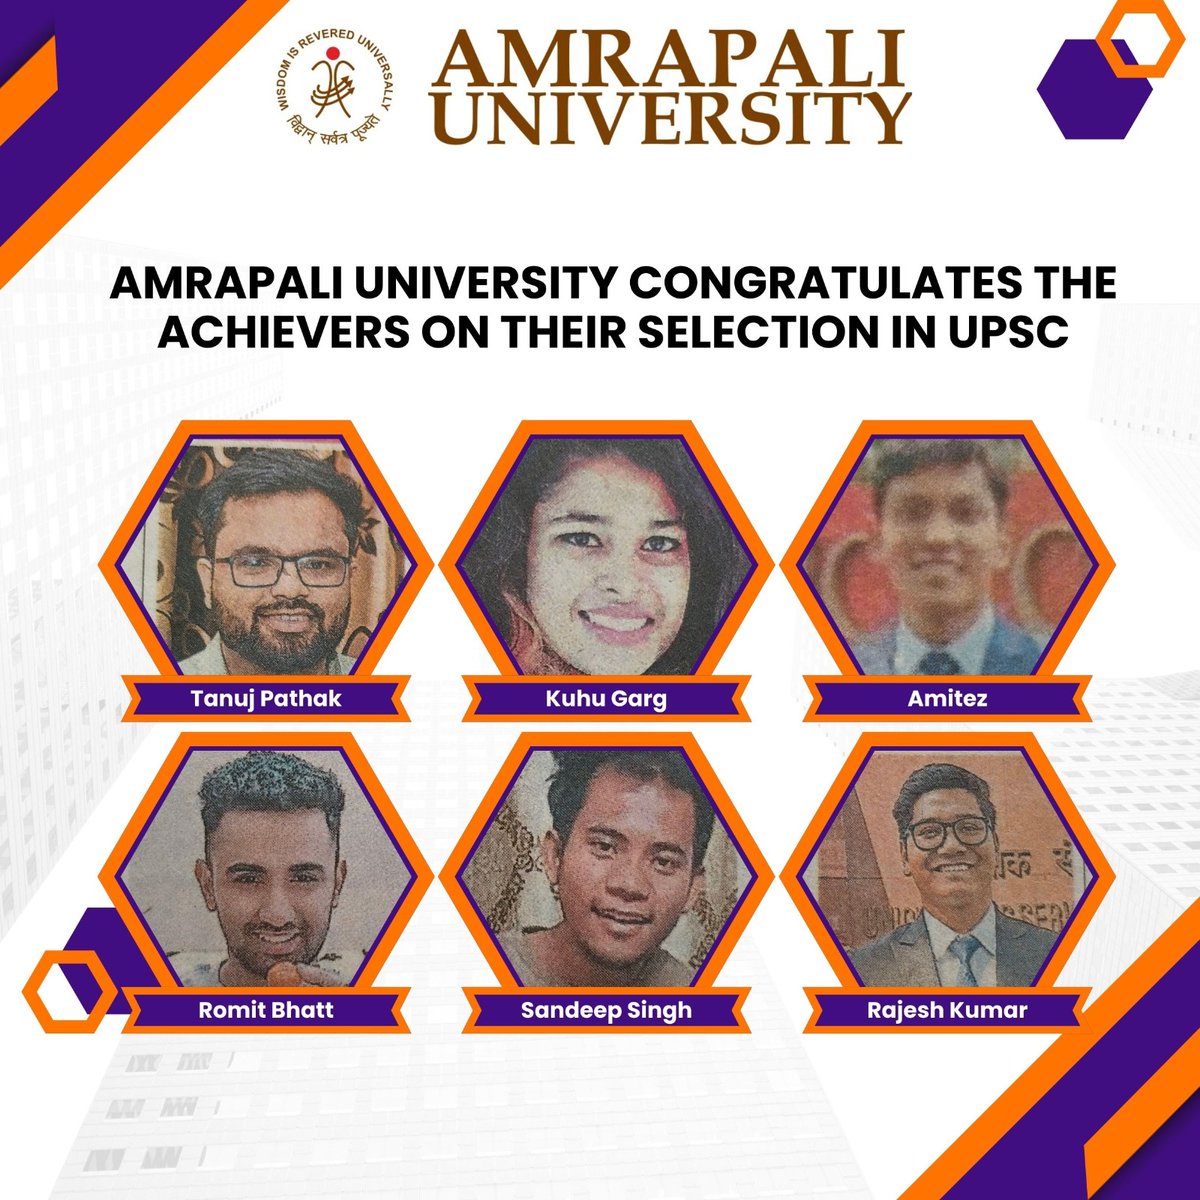 Heartiest Congratulations to the achievers on their selection in UPSC. We are proud of your achievements.

#amrapali #amrapaliuniversity #bestuniversity #bestcollege #upsctoppers #uttarakhandtoppers #uttarakhand #upsc #ias